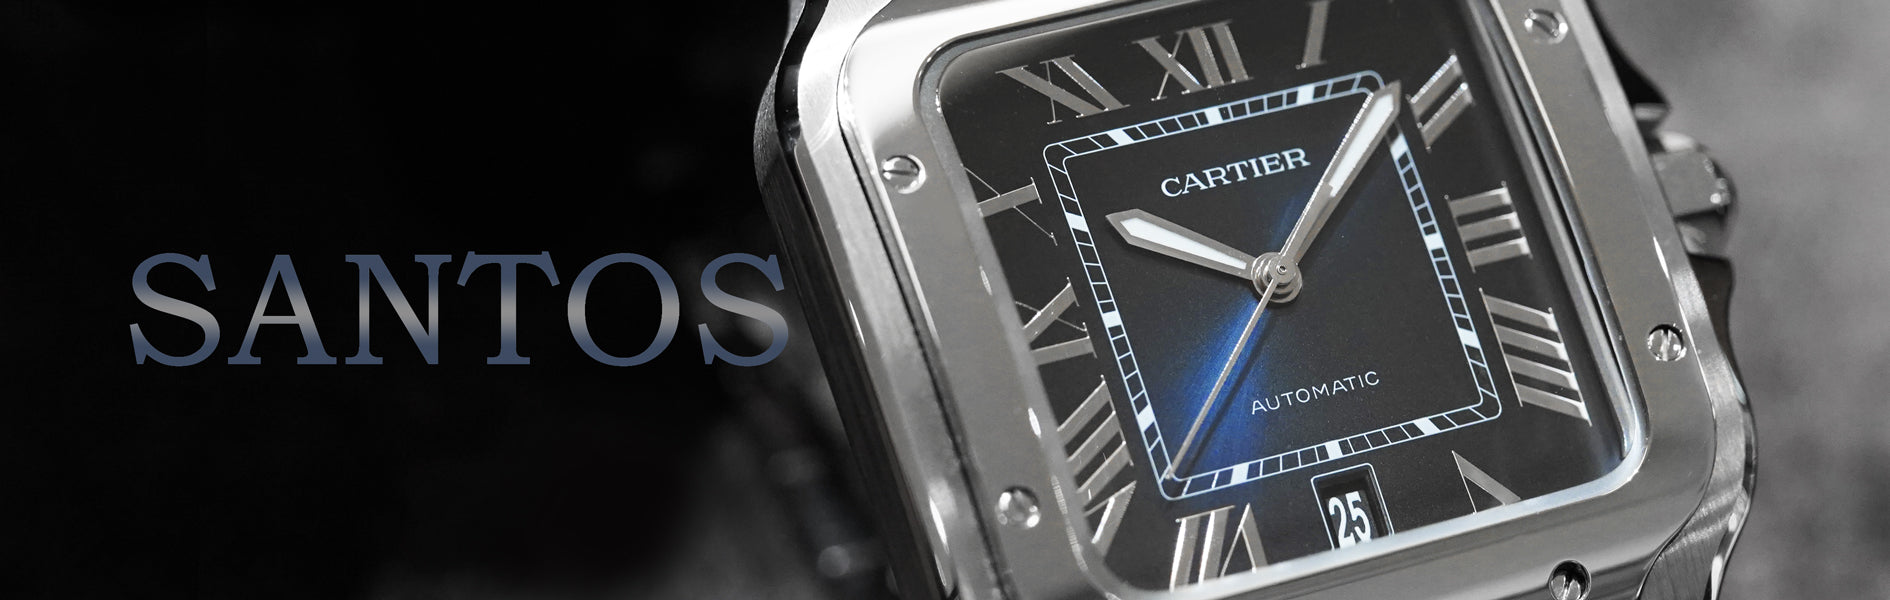 Cartier Santos Series Inventory List | Brand Watch Specialty Store Moon Phase Mail Order Site